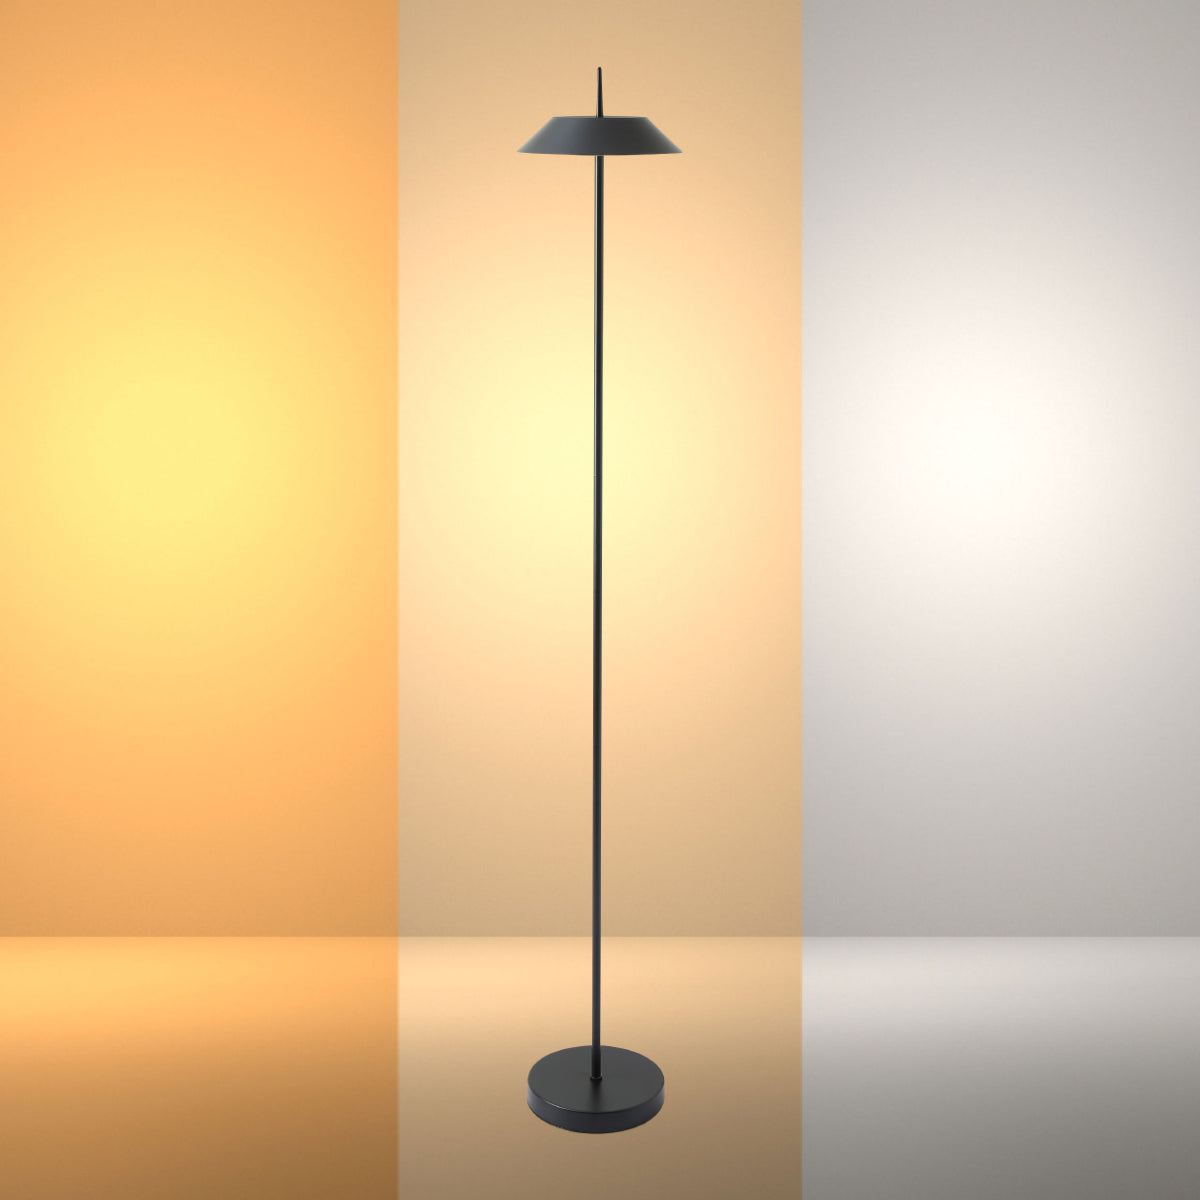 Main image of Portable LED Floor Lamp with Dimmable CCT - Sleek Design